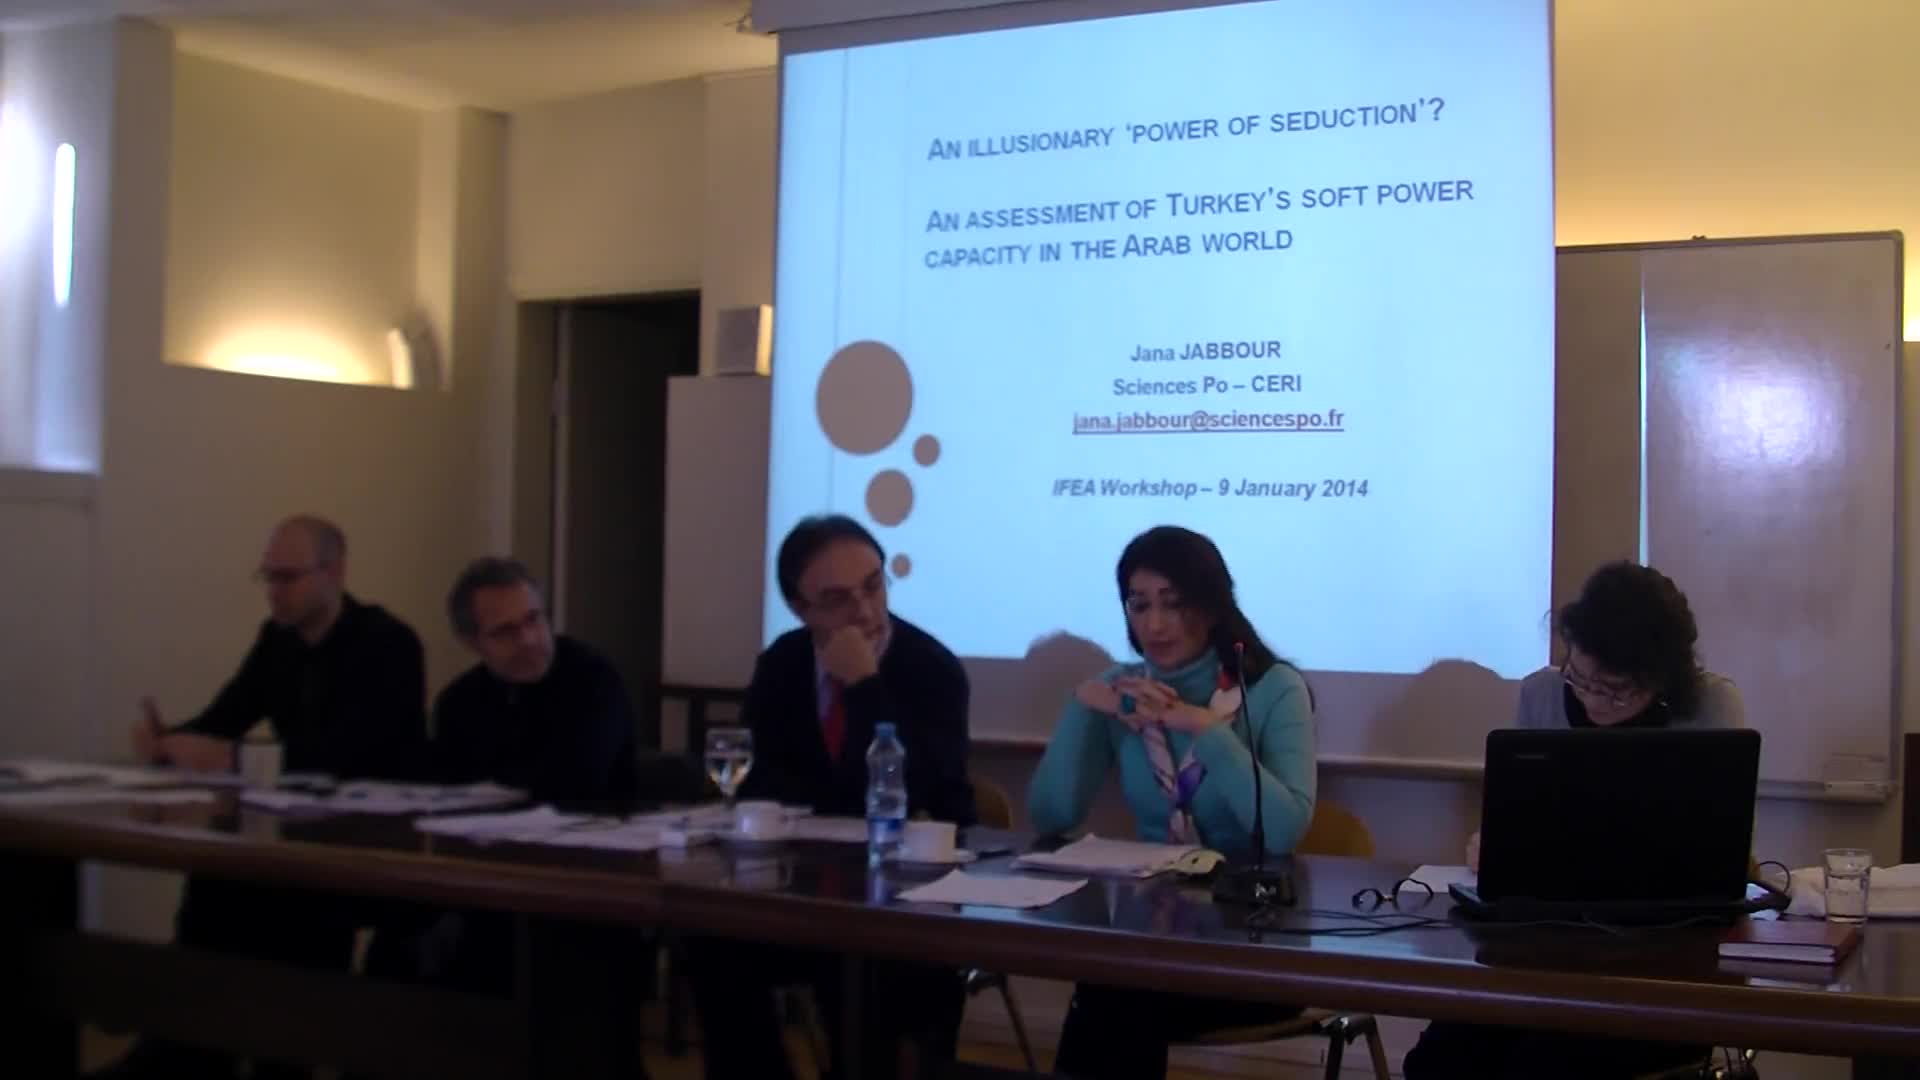 An illusionary ‘power of seduction’: an assessment of Turkey’s soft power capacity in the Arab World